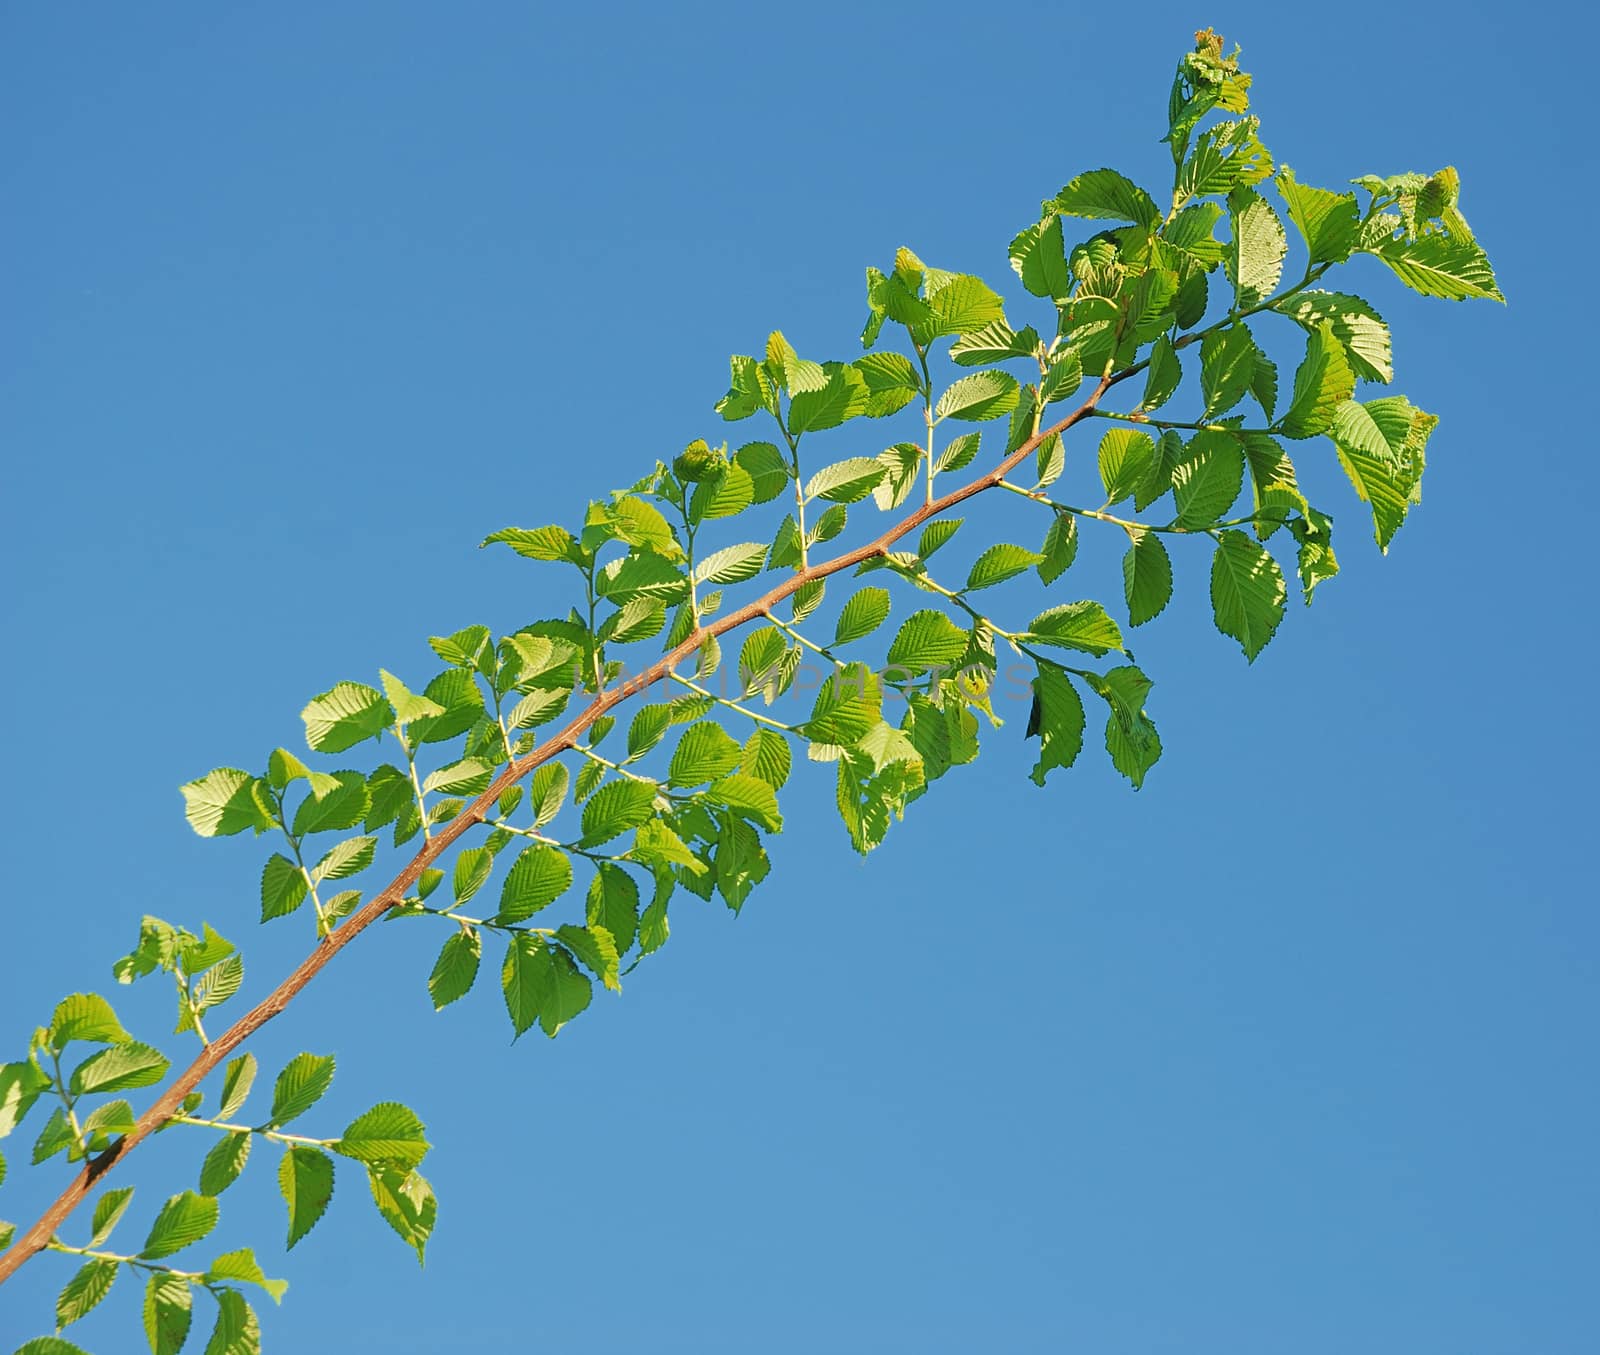  Branch with green leaves